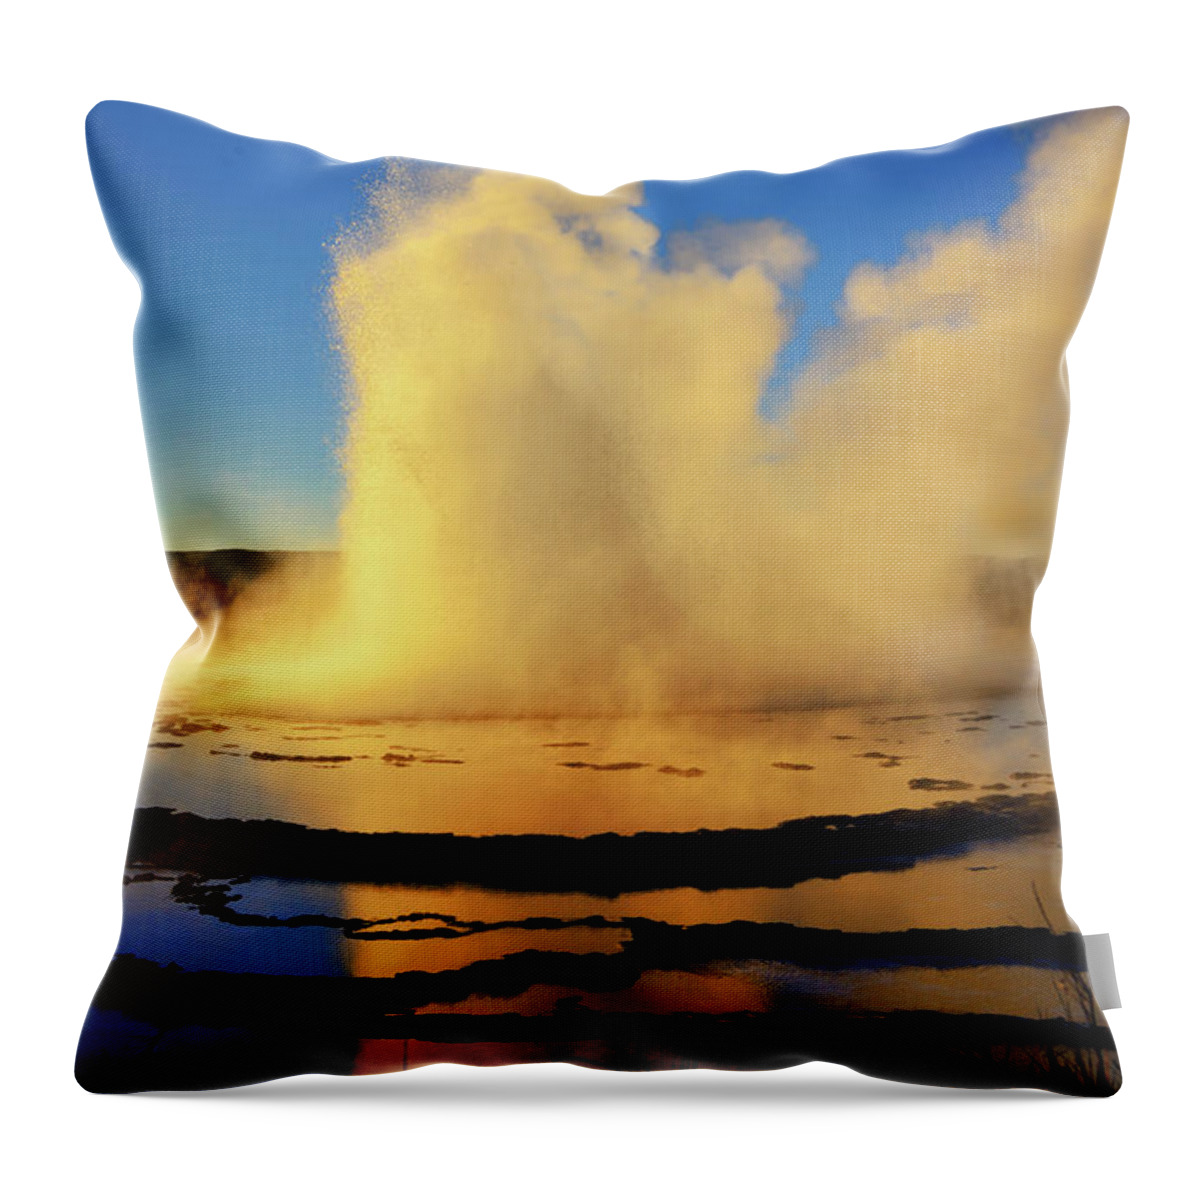 Great Fountain Geyser Throw Pillow featuring the photograph Great Fountain Geyser Sunset Eruption by Greg Norrell